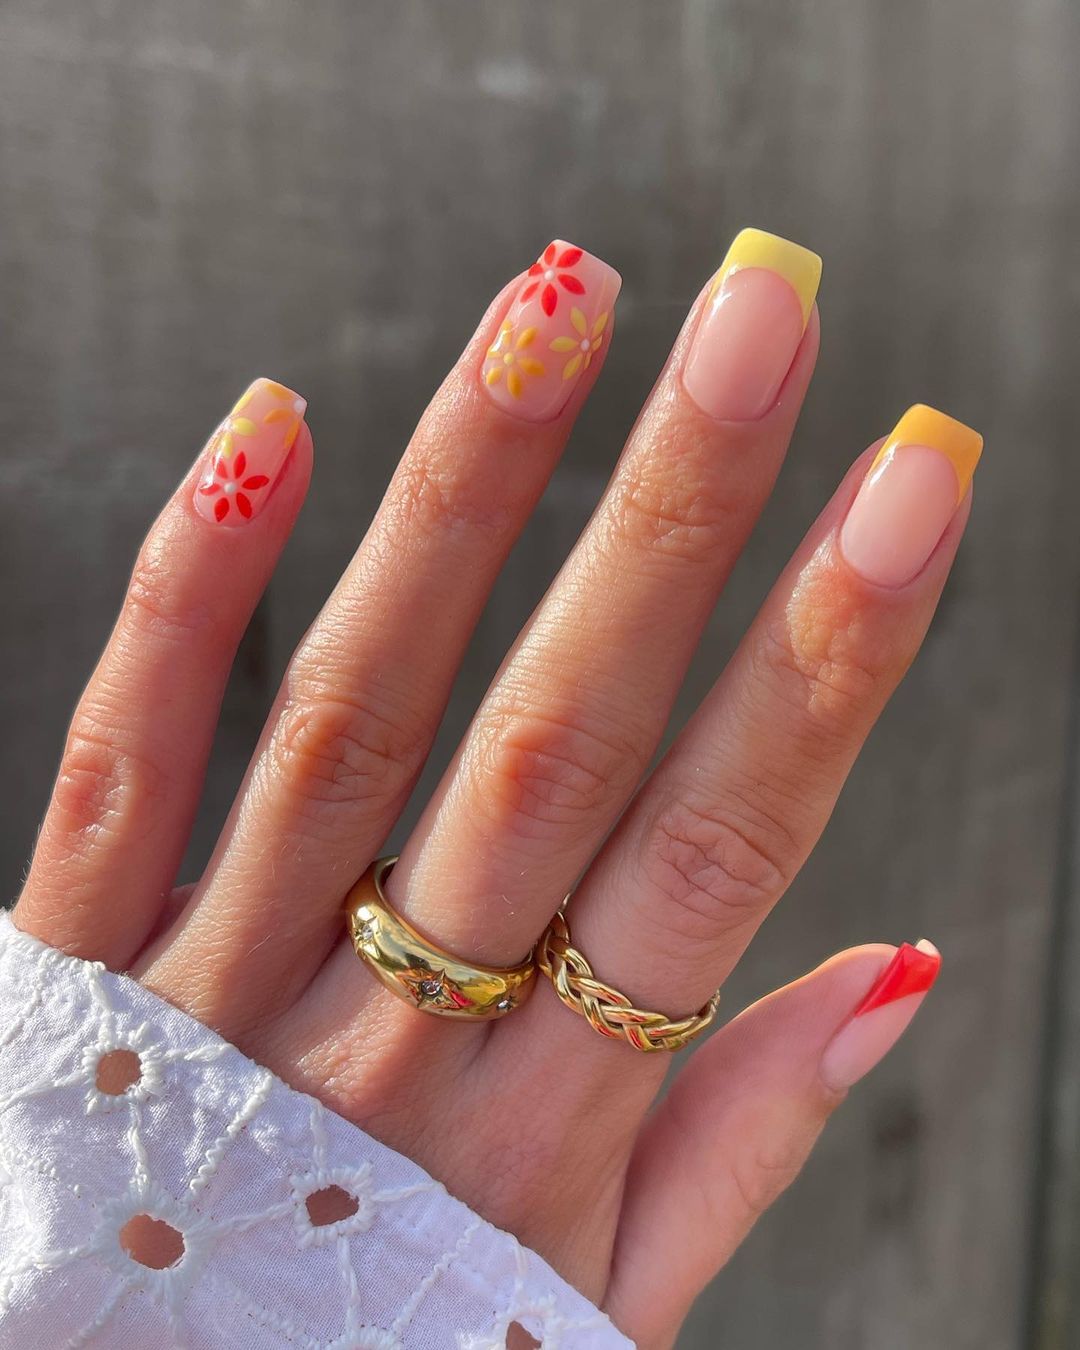 Sunset inspired nails